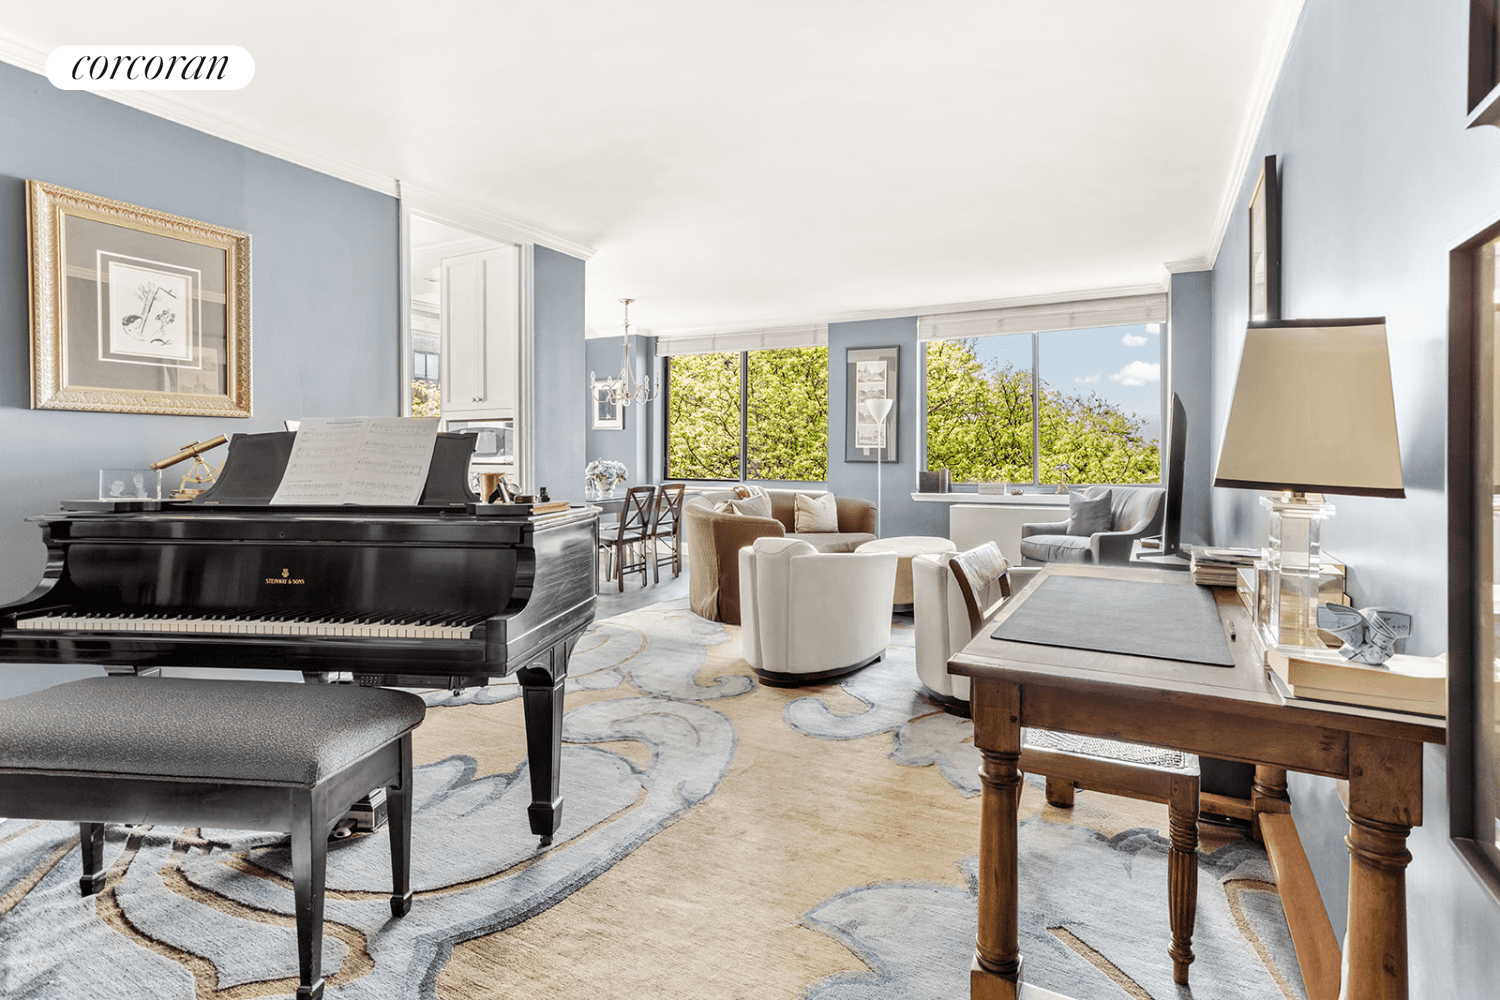 Welcome to this extraordinary dream home situated in a coveted corner location, offering breathtaking views of the Hudson River, Statue of Liberty, and the expansive Southern Skies.